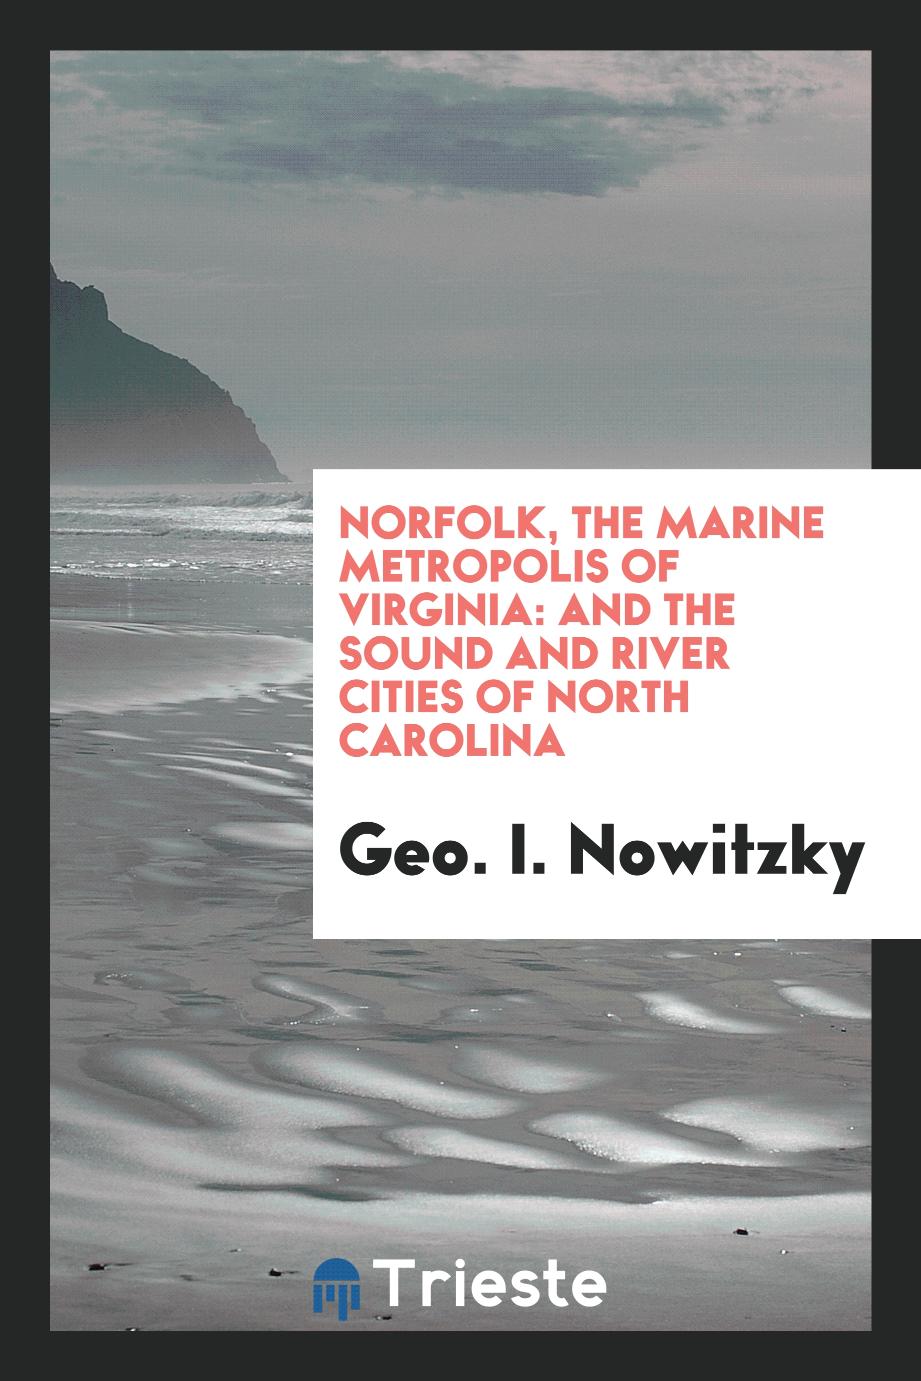 Norfolk, the marine metropolis of Virginia: and the sound and river cities of North Carolina